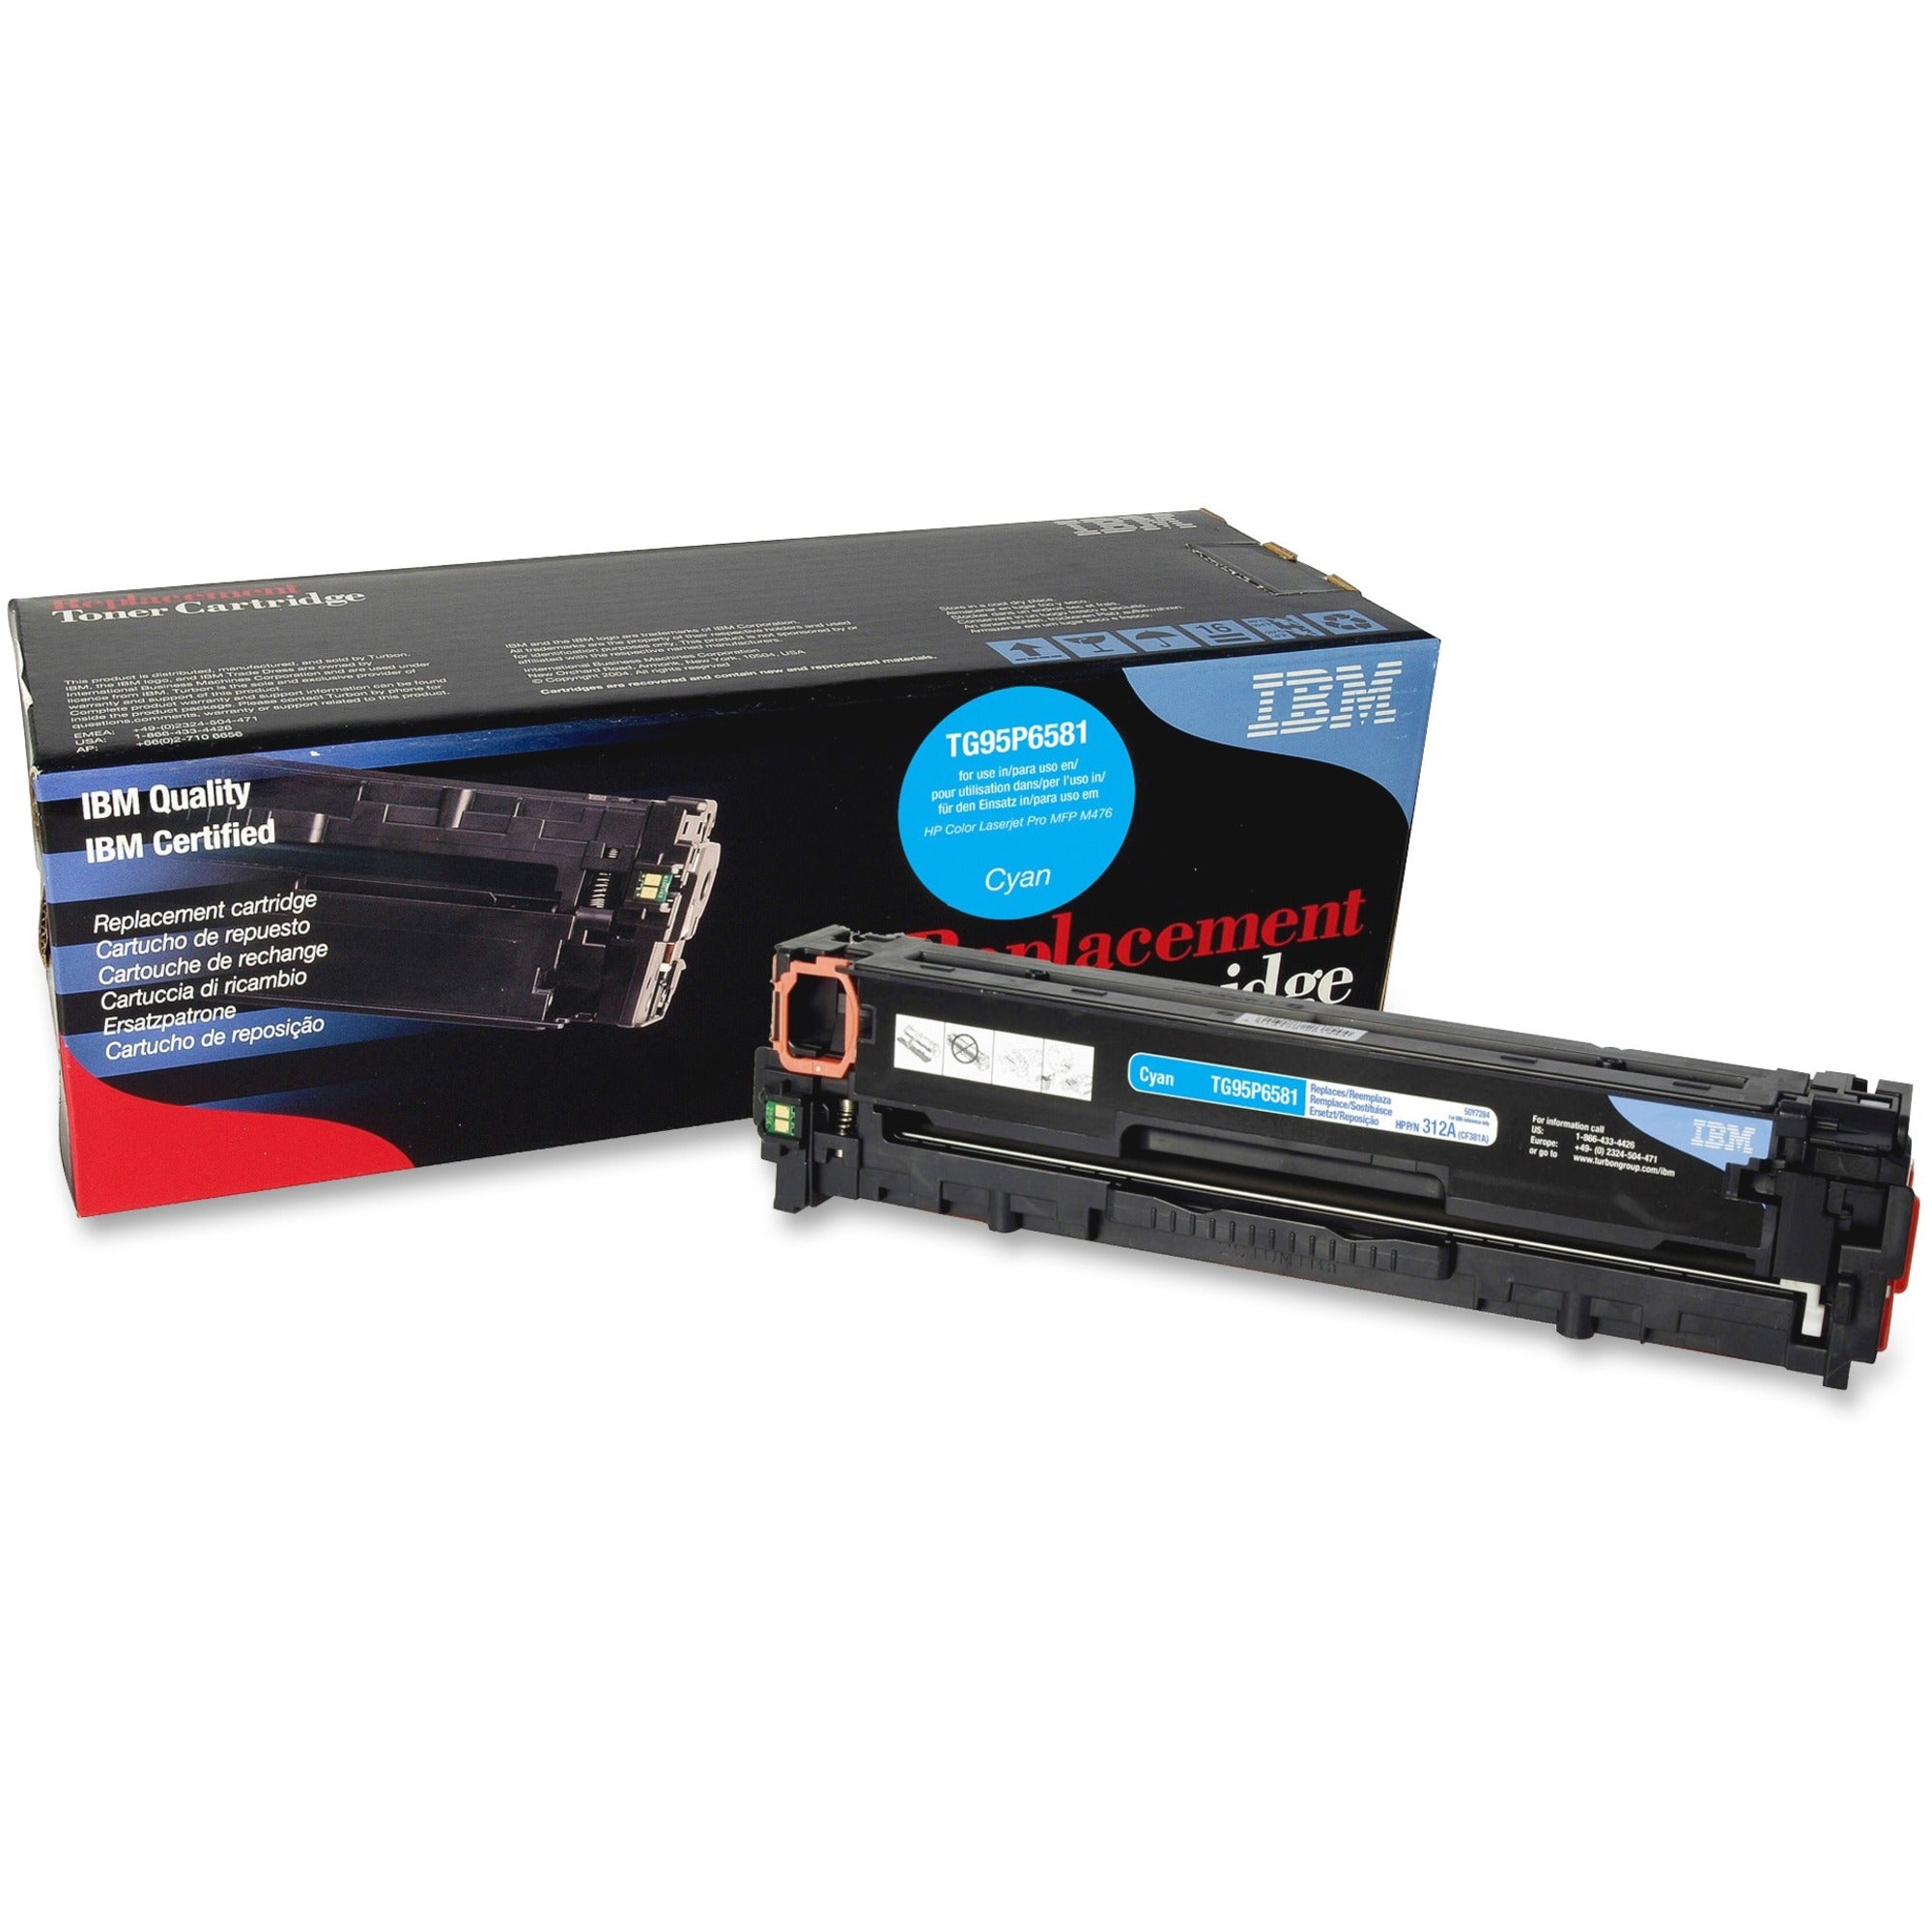 IBM Remanufactured Toner Cartridge - Alternative for HP 312A (CF381A) - Laser - 2700 Pages - Cyan - 1 Each - 